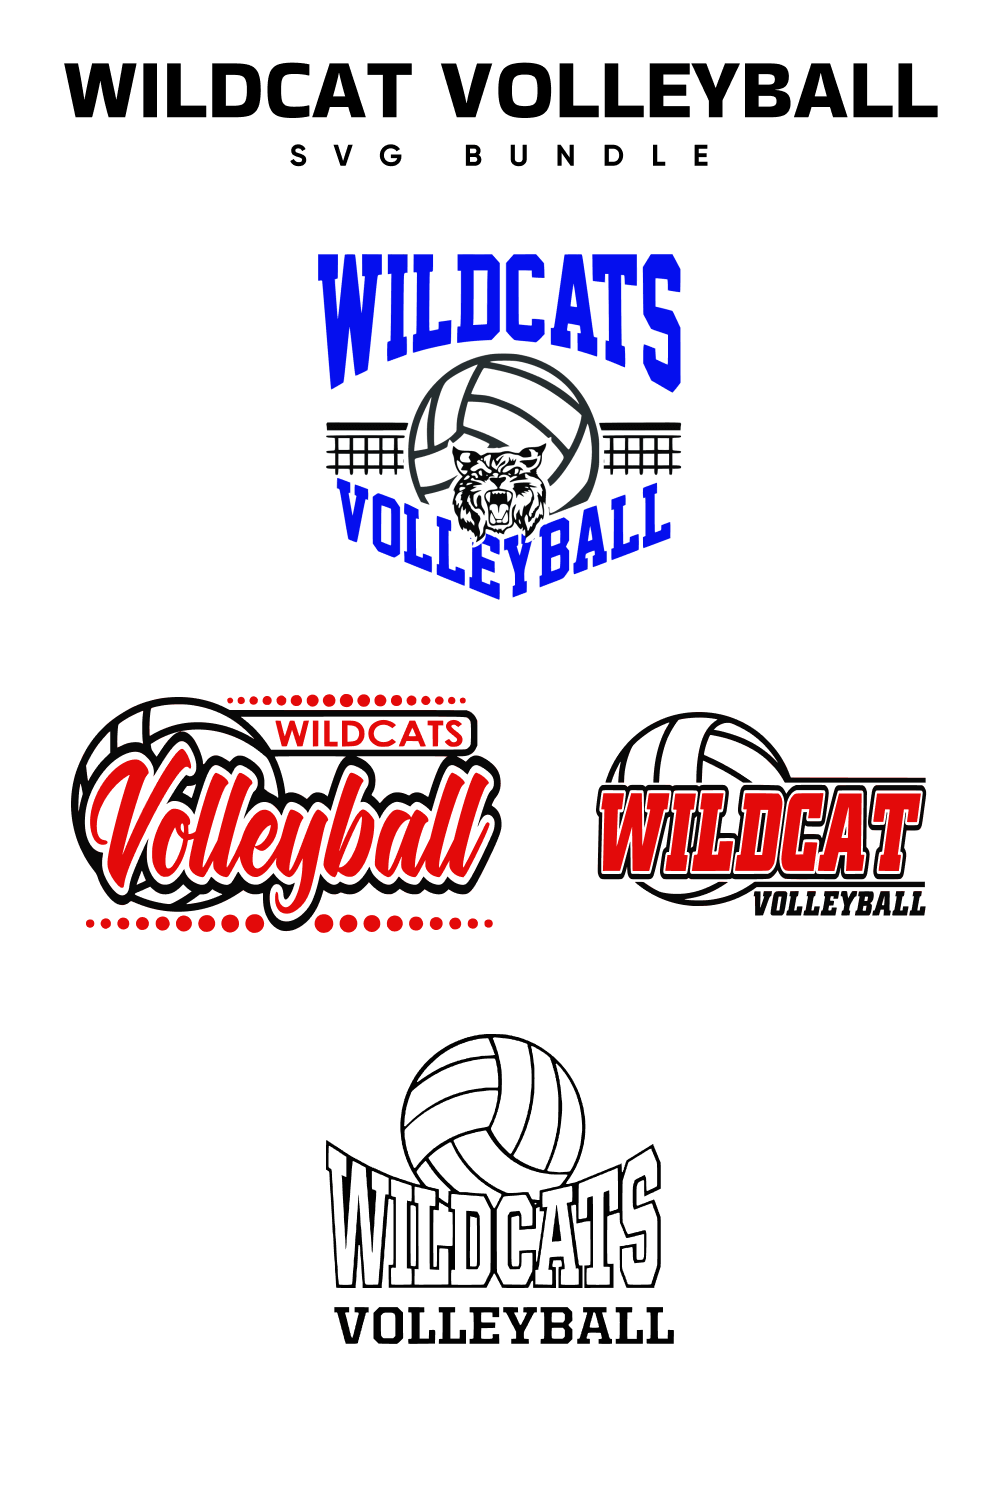 Bunch of volleyball logos that are on a white background.